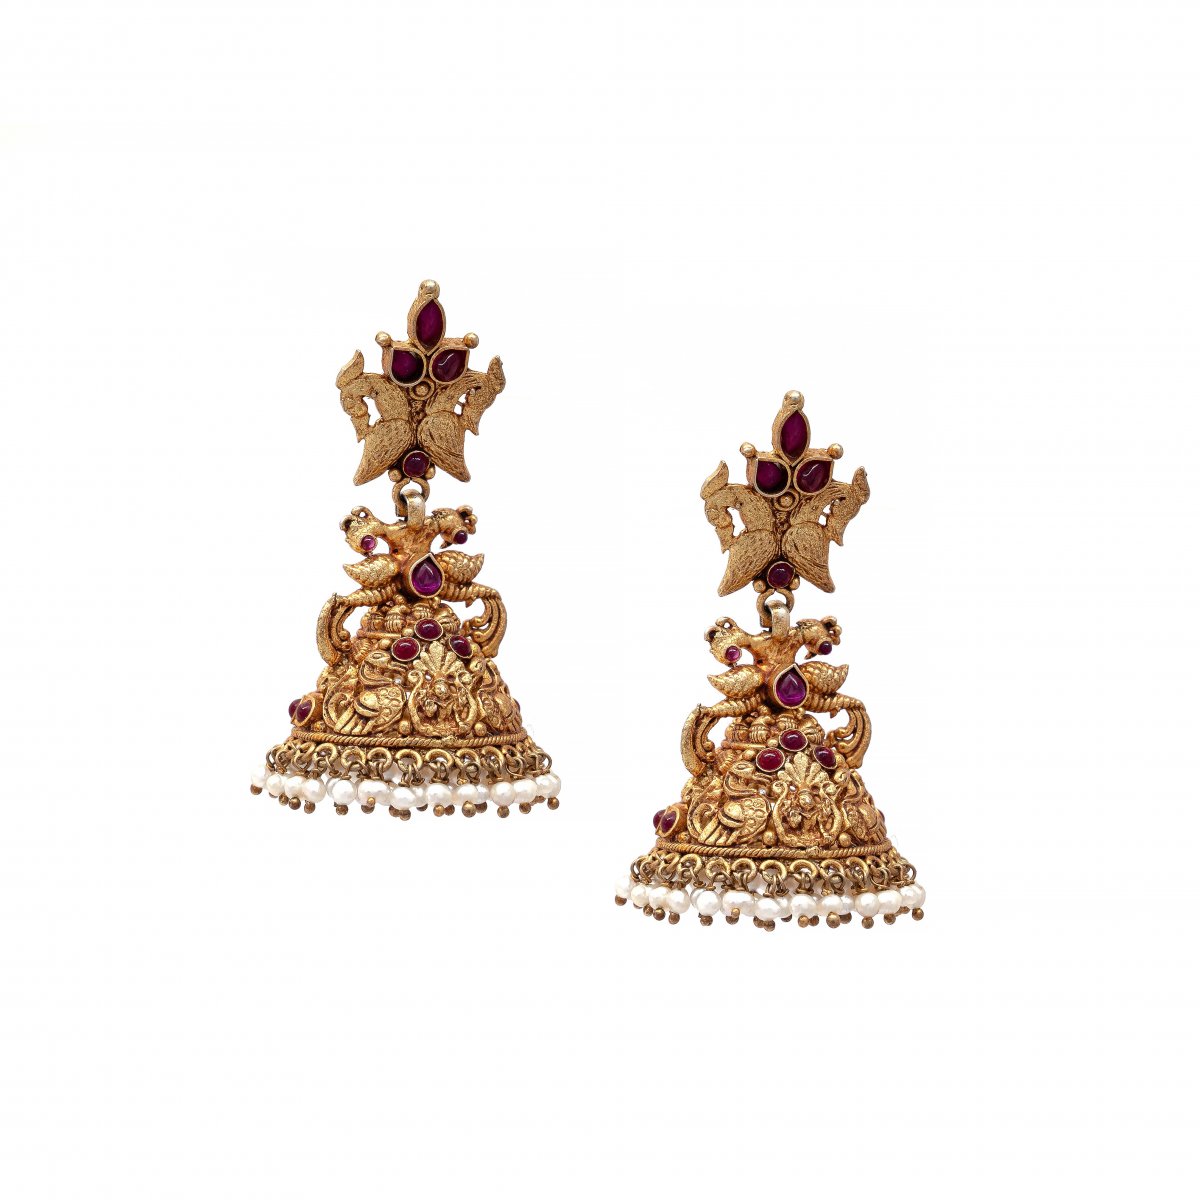 HANDCRADTED STUDS JHUMKAS EARRINGS SET FOR WOMEN IN PURE SILVER GOLD POLISHED